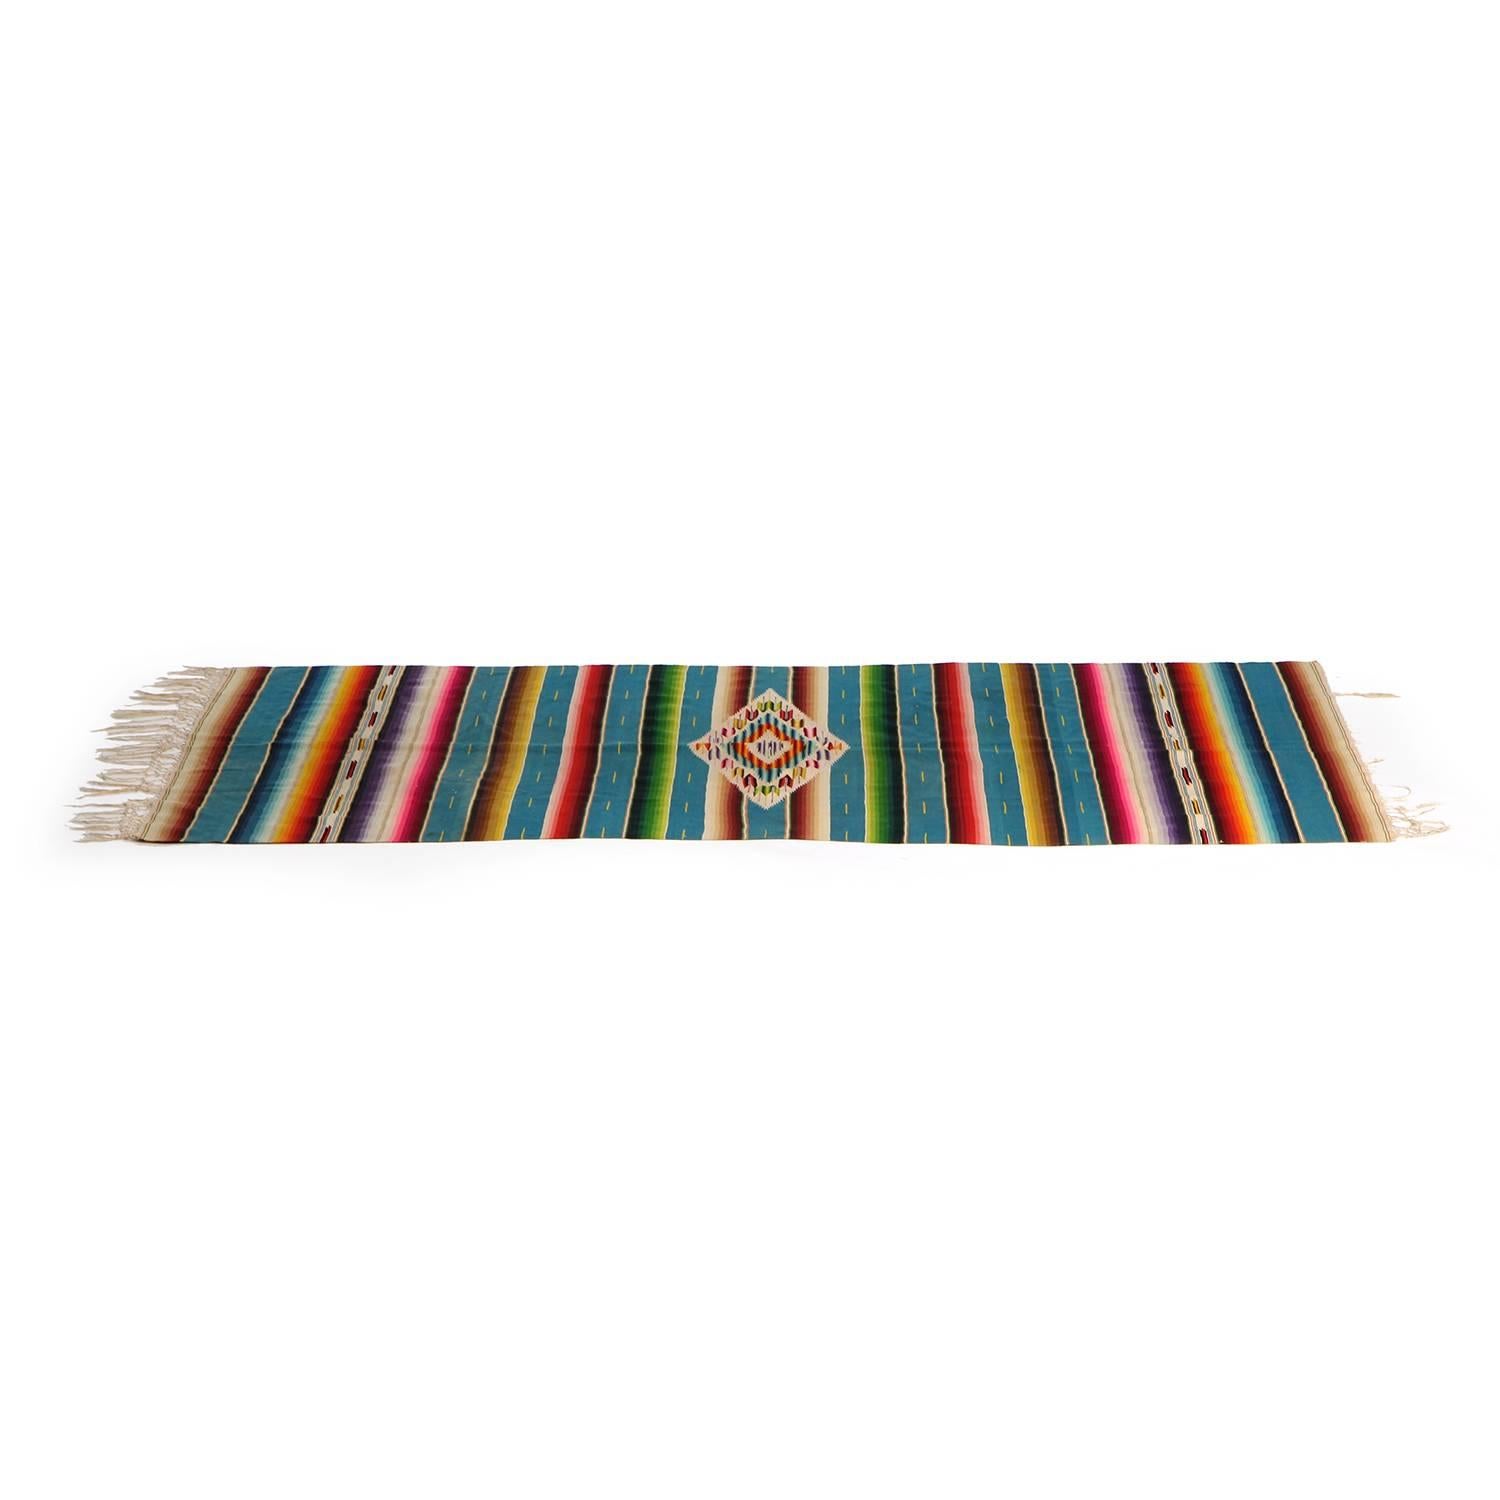 A finely crafted and vibrantly hued striped hand loomed wool serape from Saltillo, Mexico.